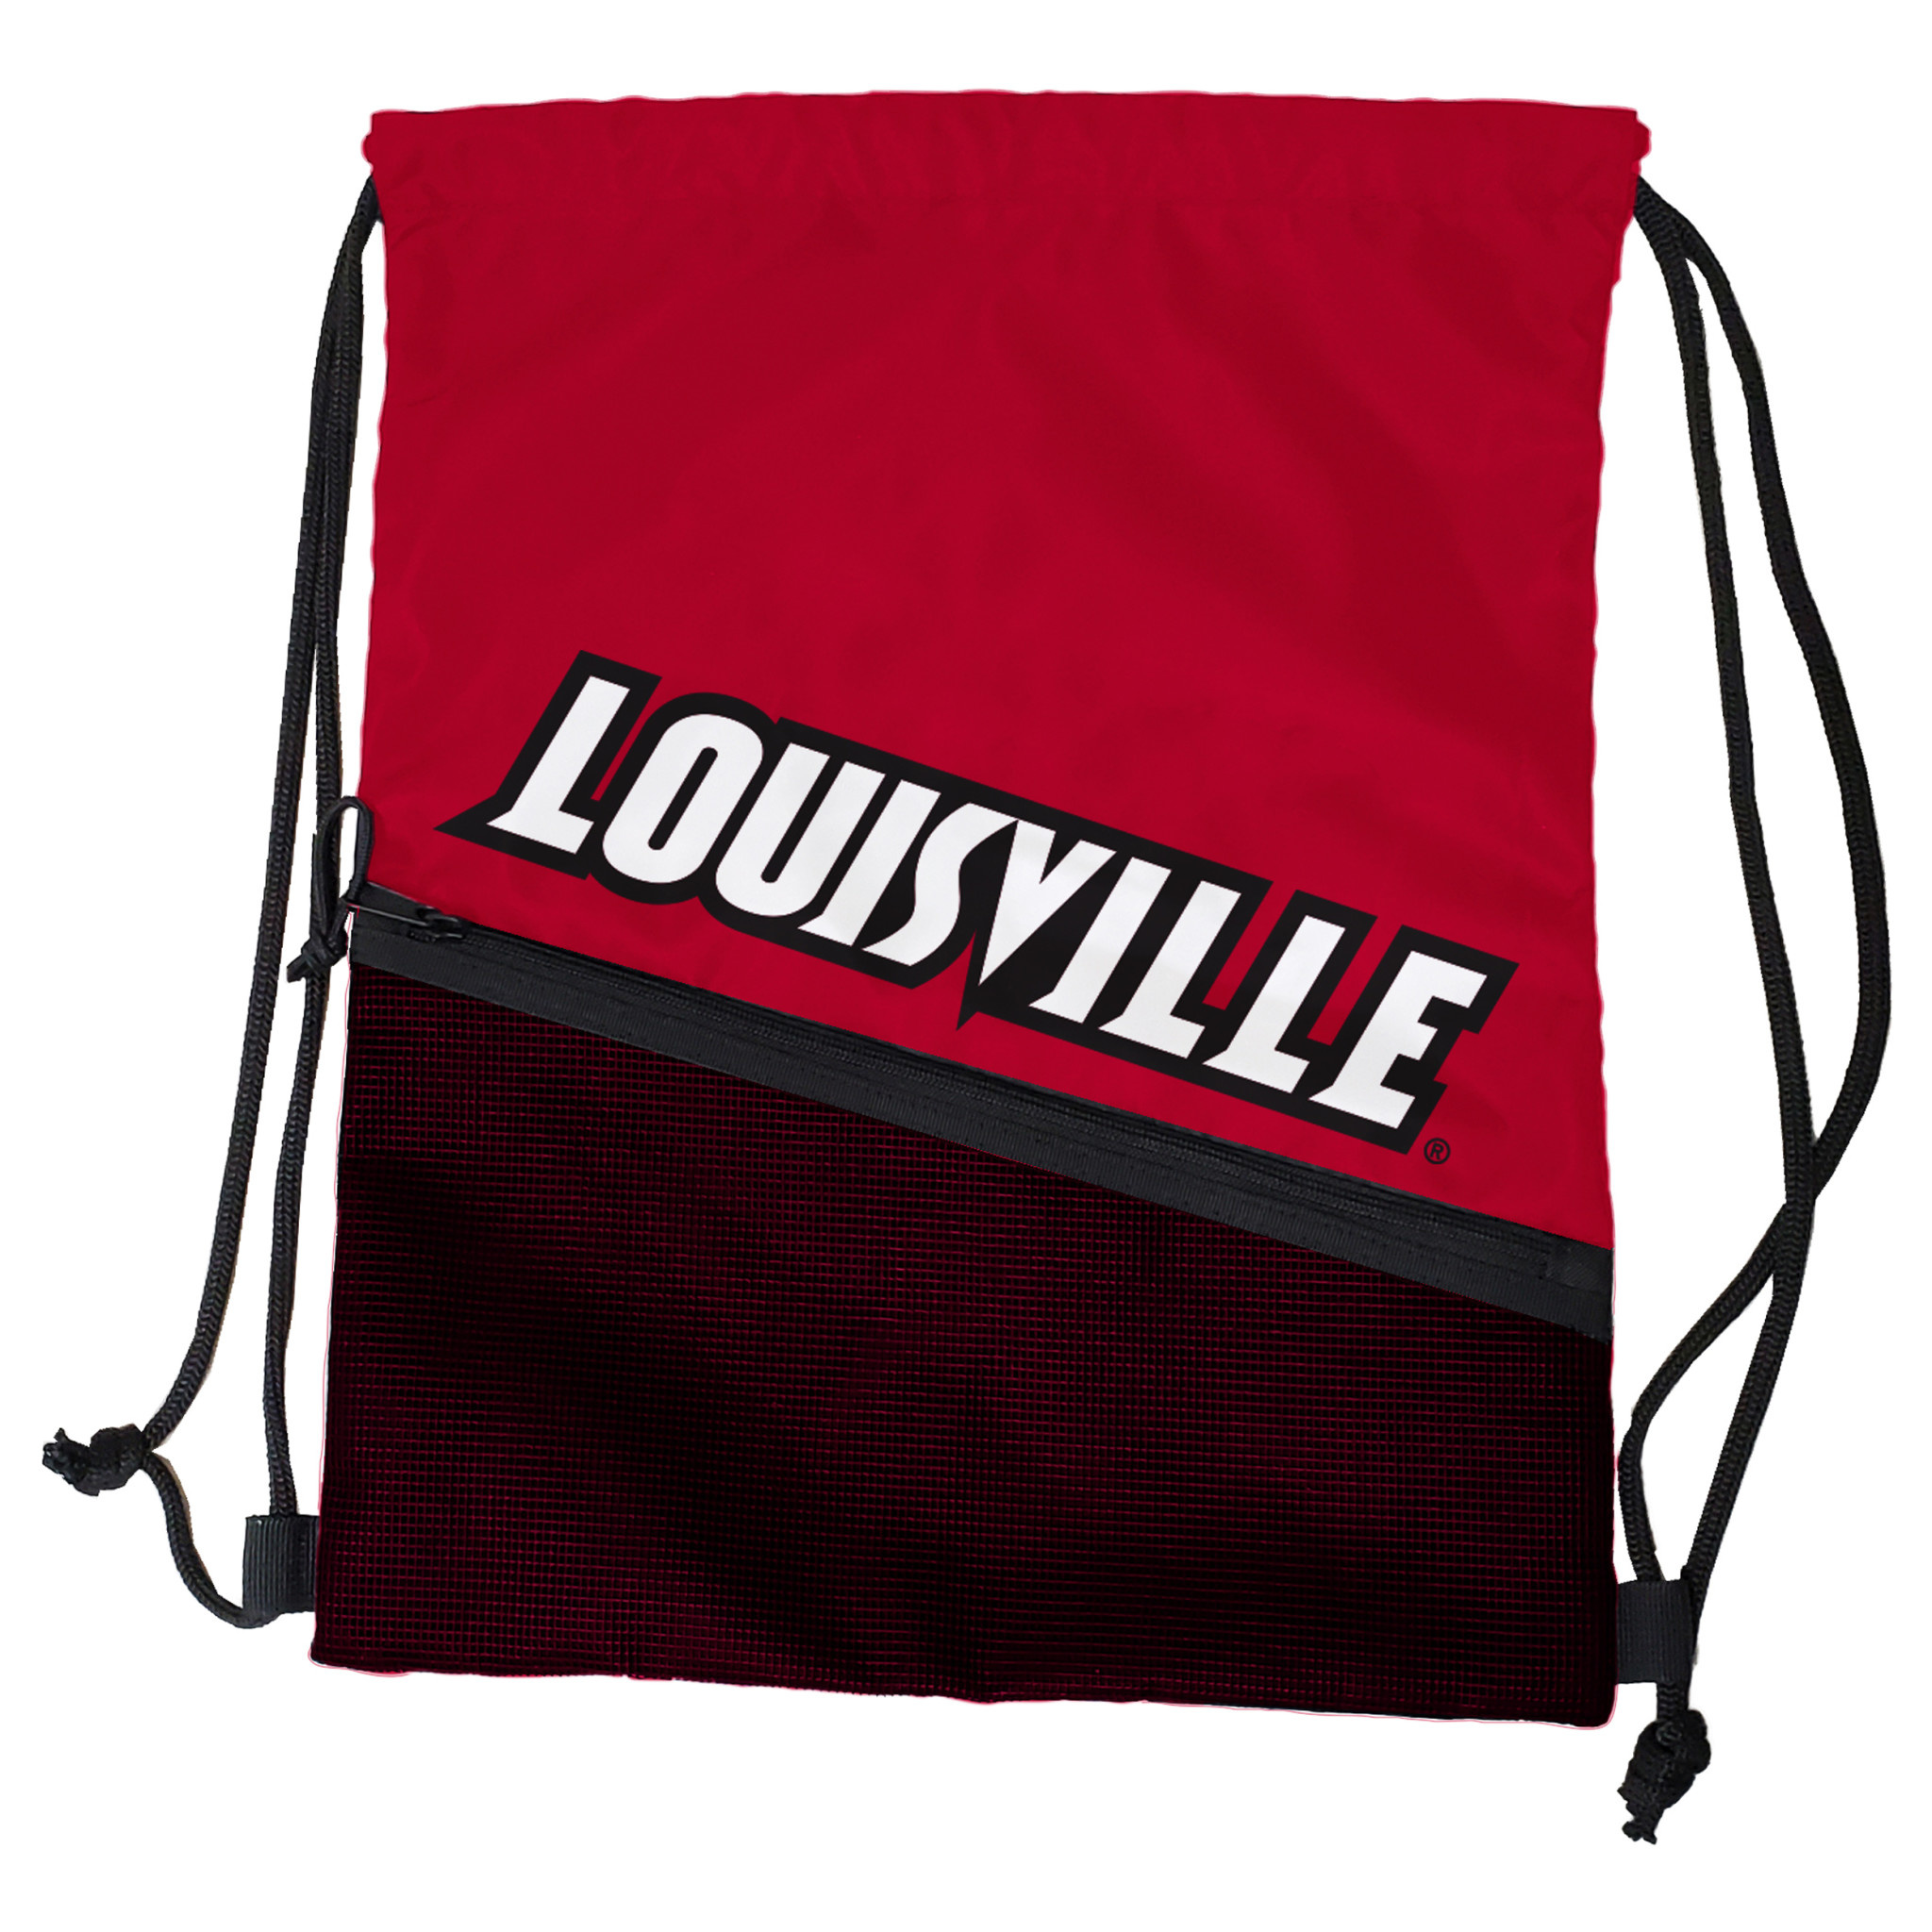 Totes, Bags & Purses - JD Becker's UK & UofL Superstore